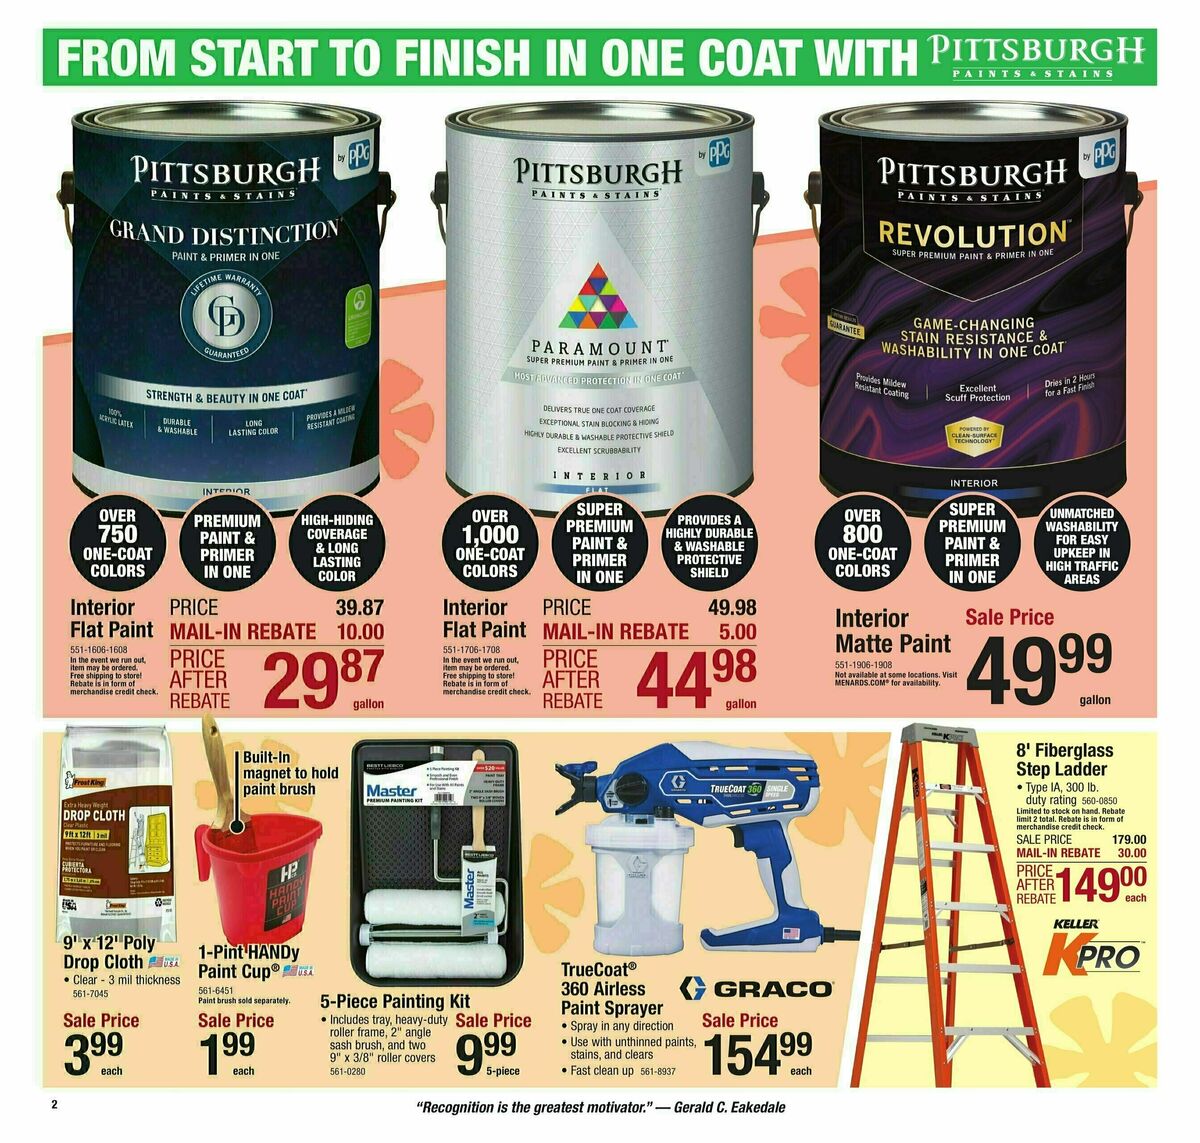 Menards Days Sale Weekly Ad from February 14